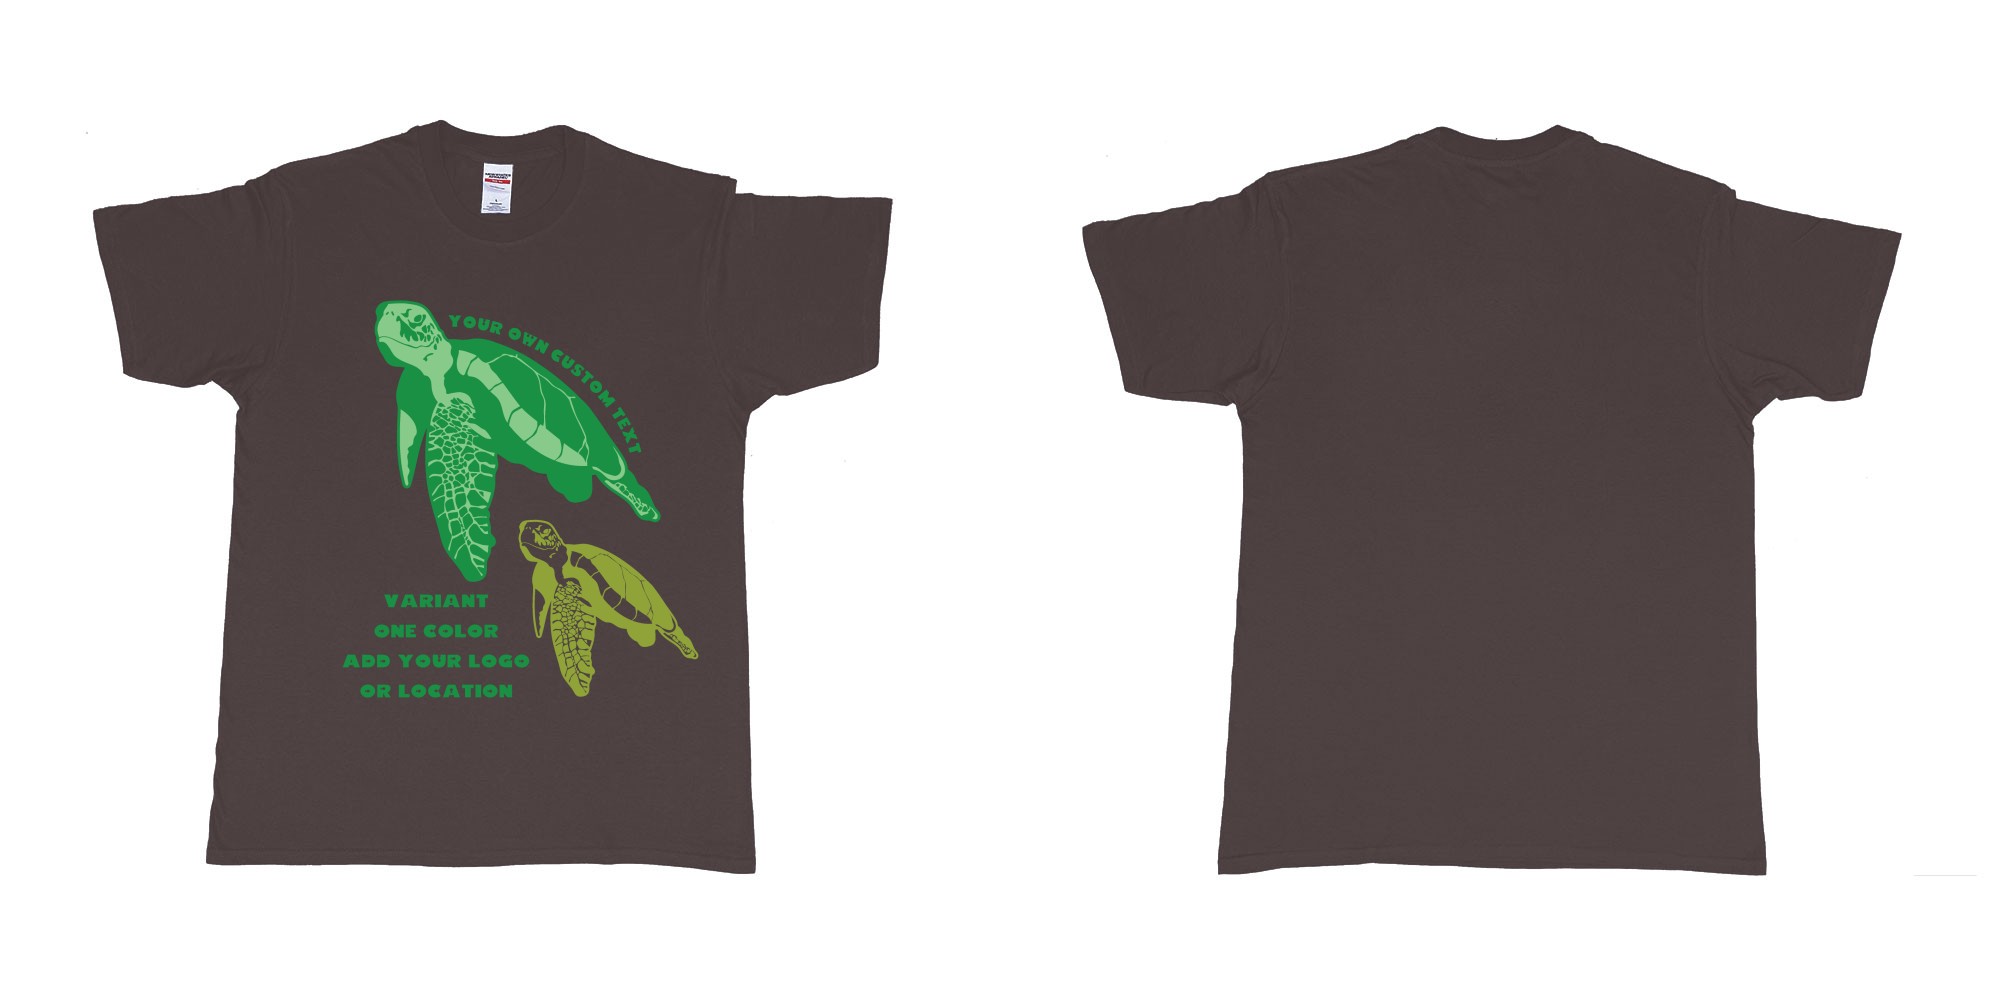 Custom tshirt design hawksbill green sea turtle chilling add logo in fabric color dark-chocolate choice your own text made in Bali by The Pirate Way